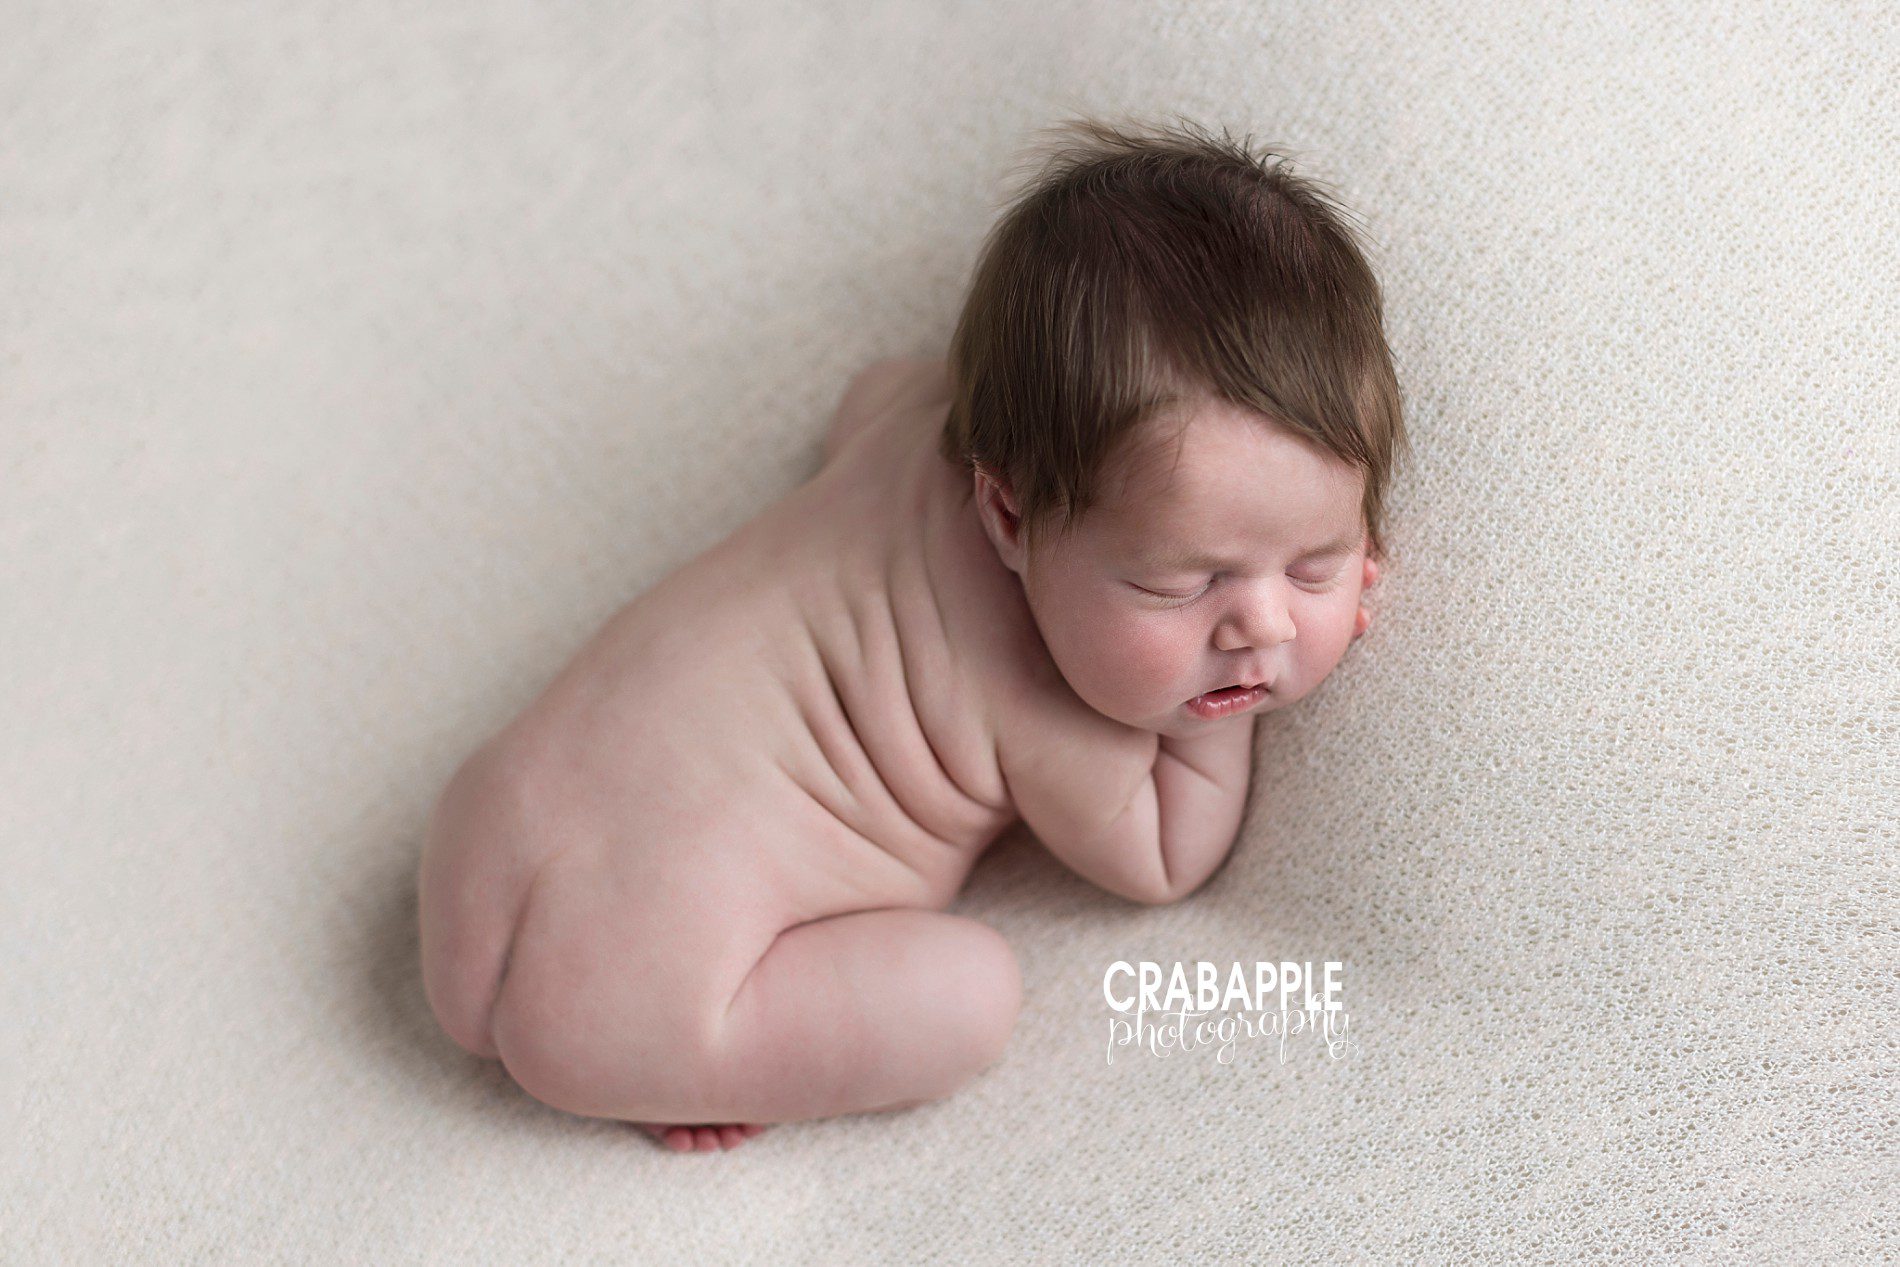 simple and clean newborn photo ideas and inspiration for poses and styling